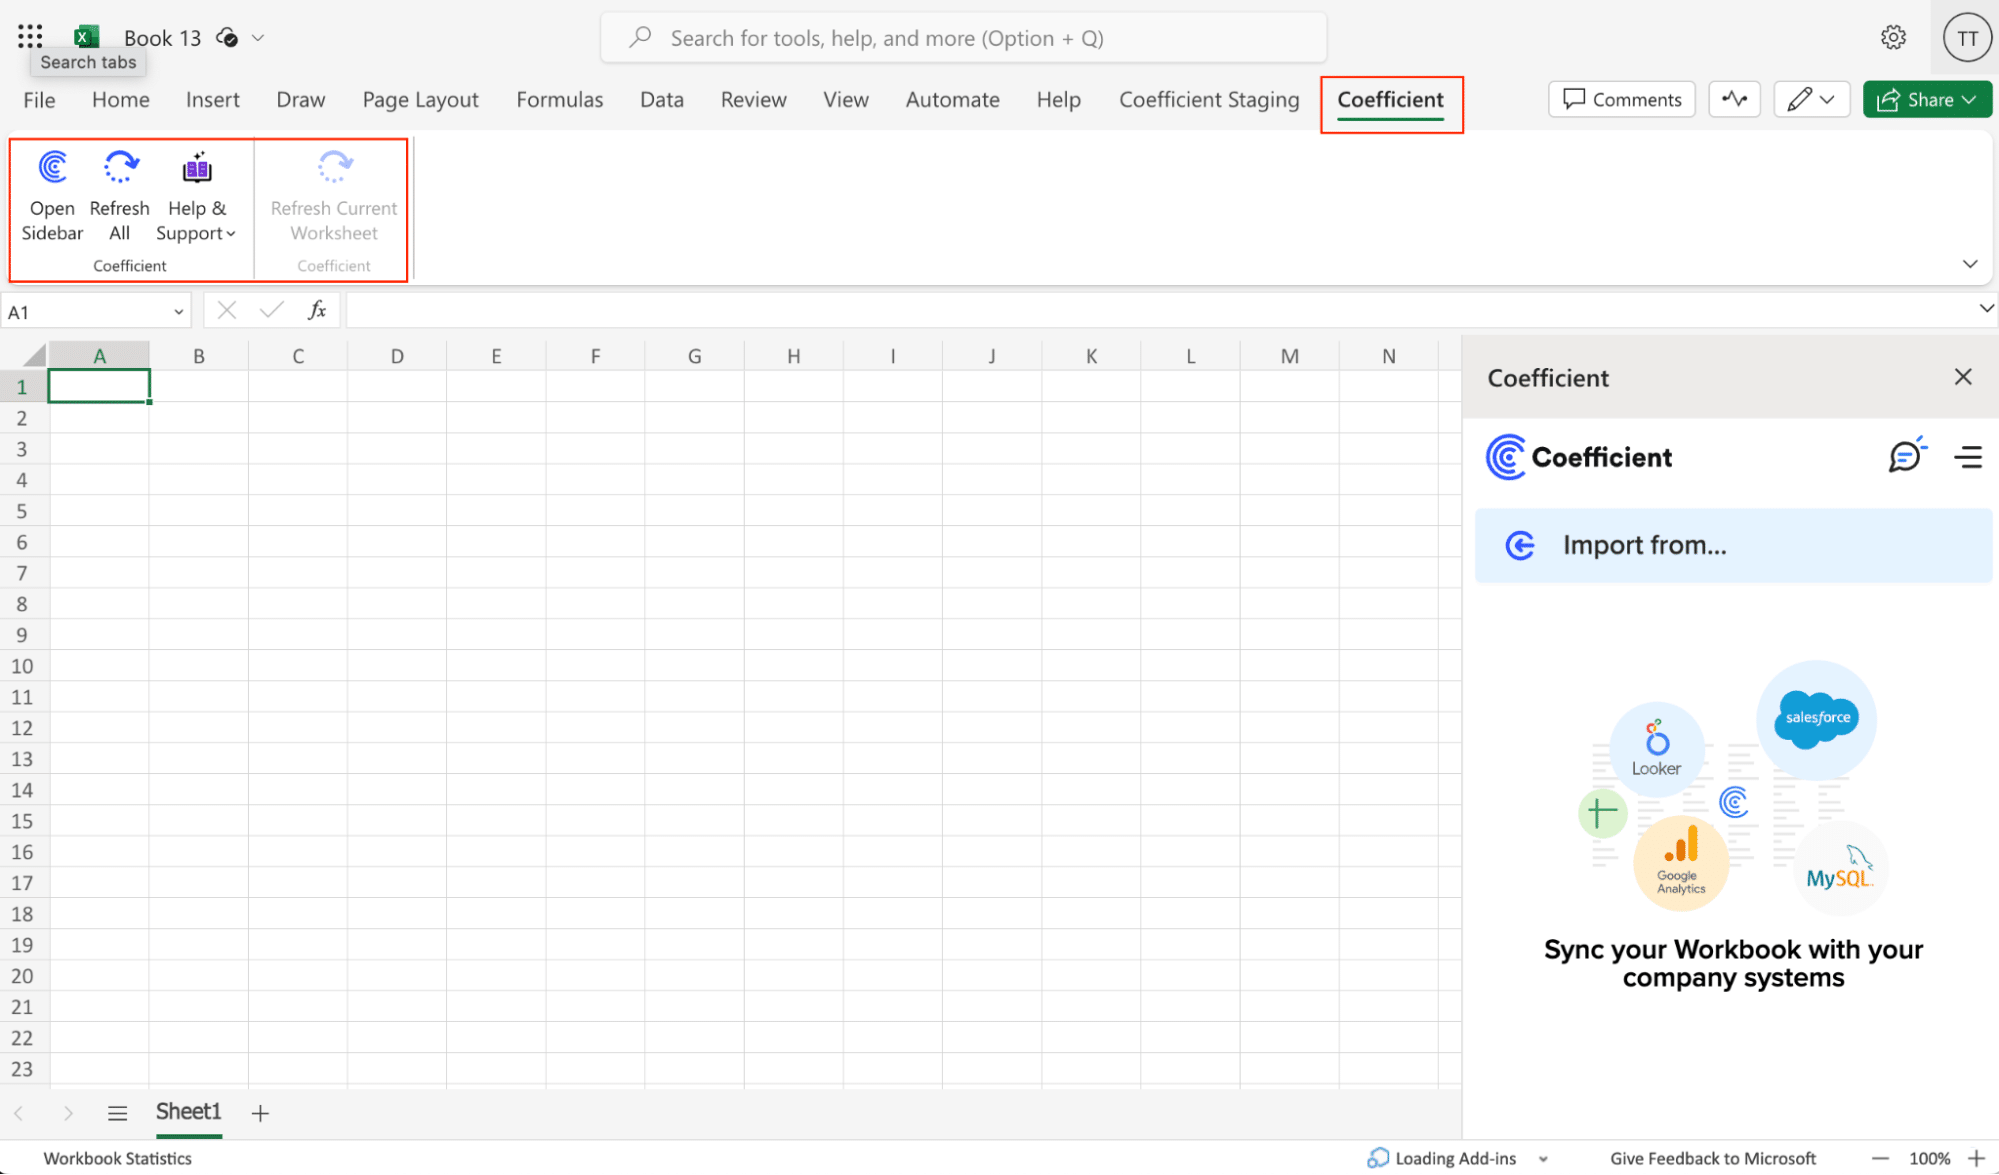 Seeing Coefficient tab added to Excel's top navigation bar after installation